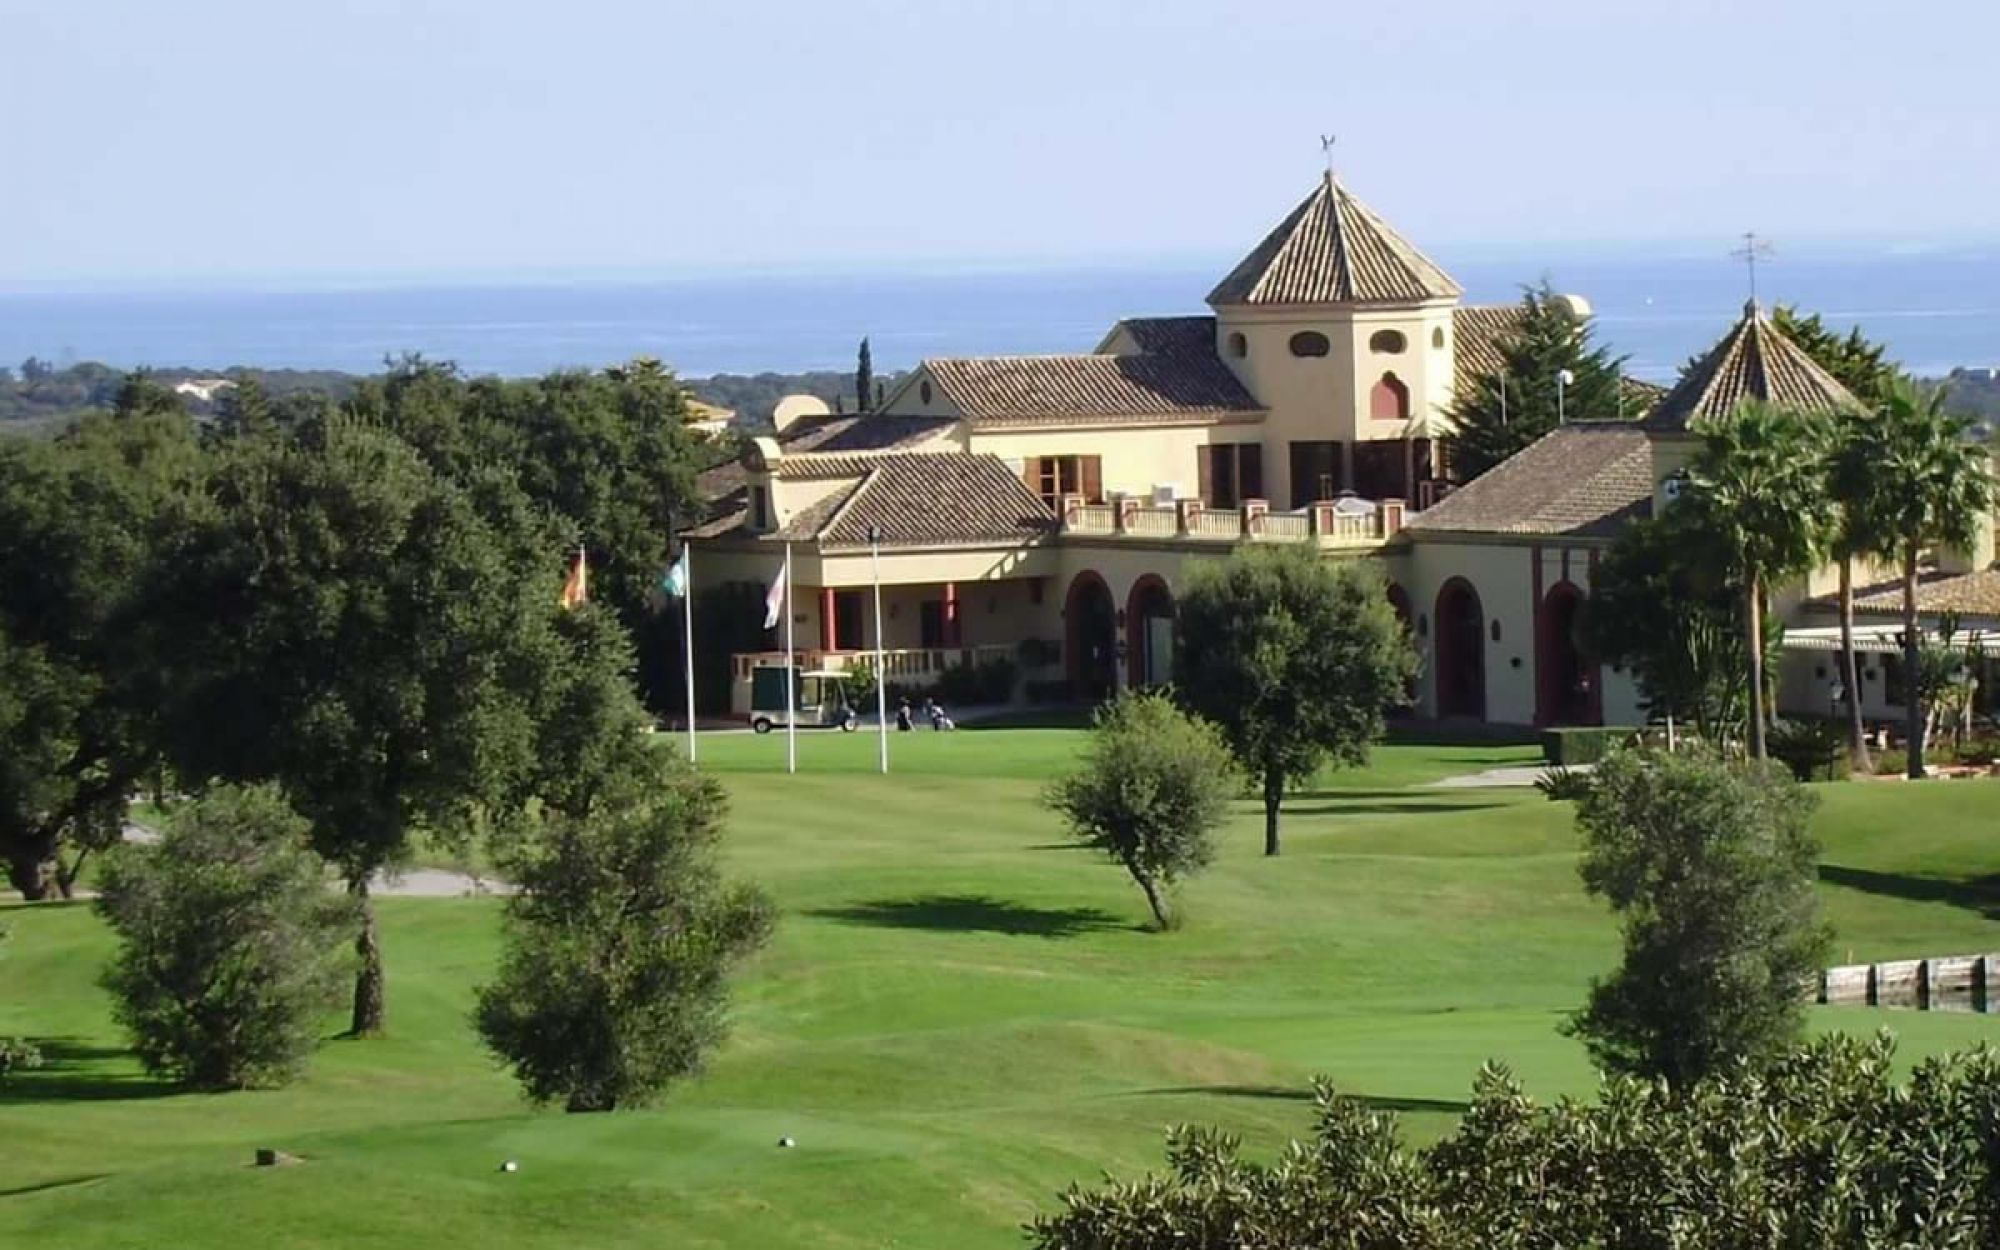 The San Roque Club - New Course's impressive golf course situated in striking Costa Del Sol.